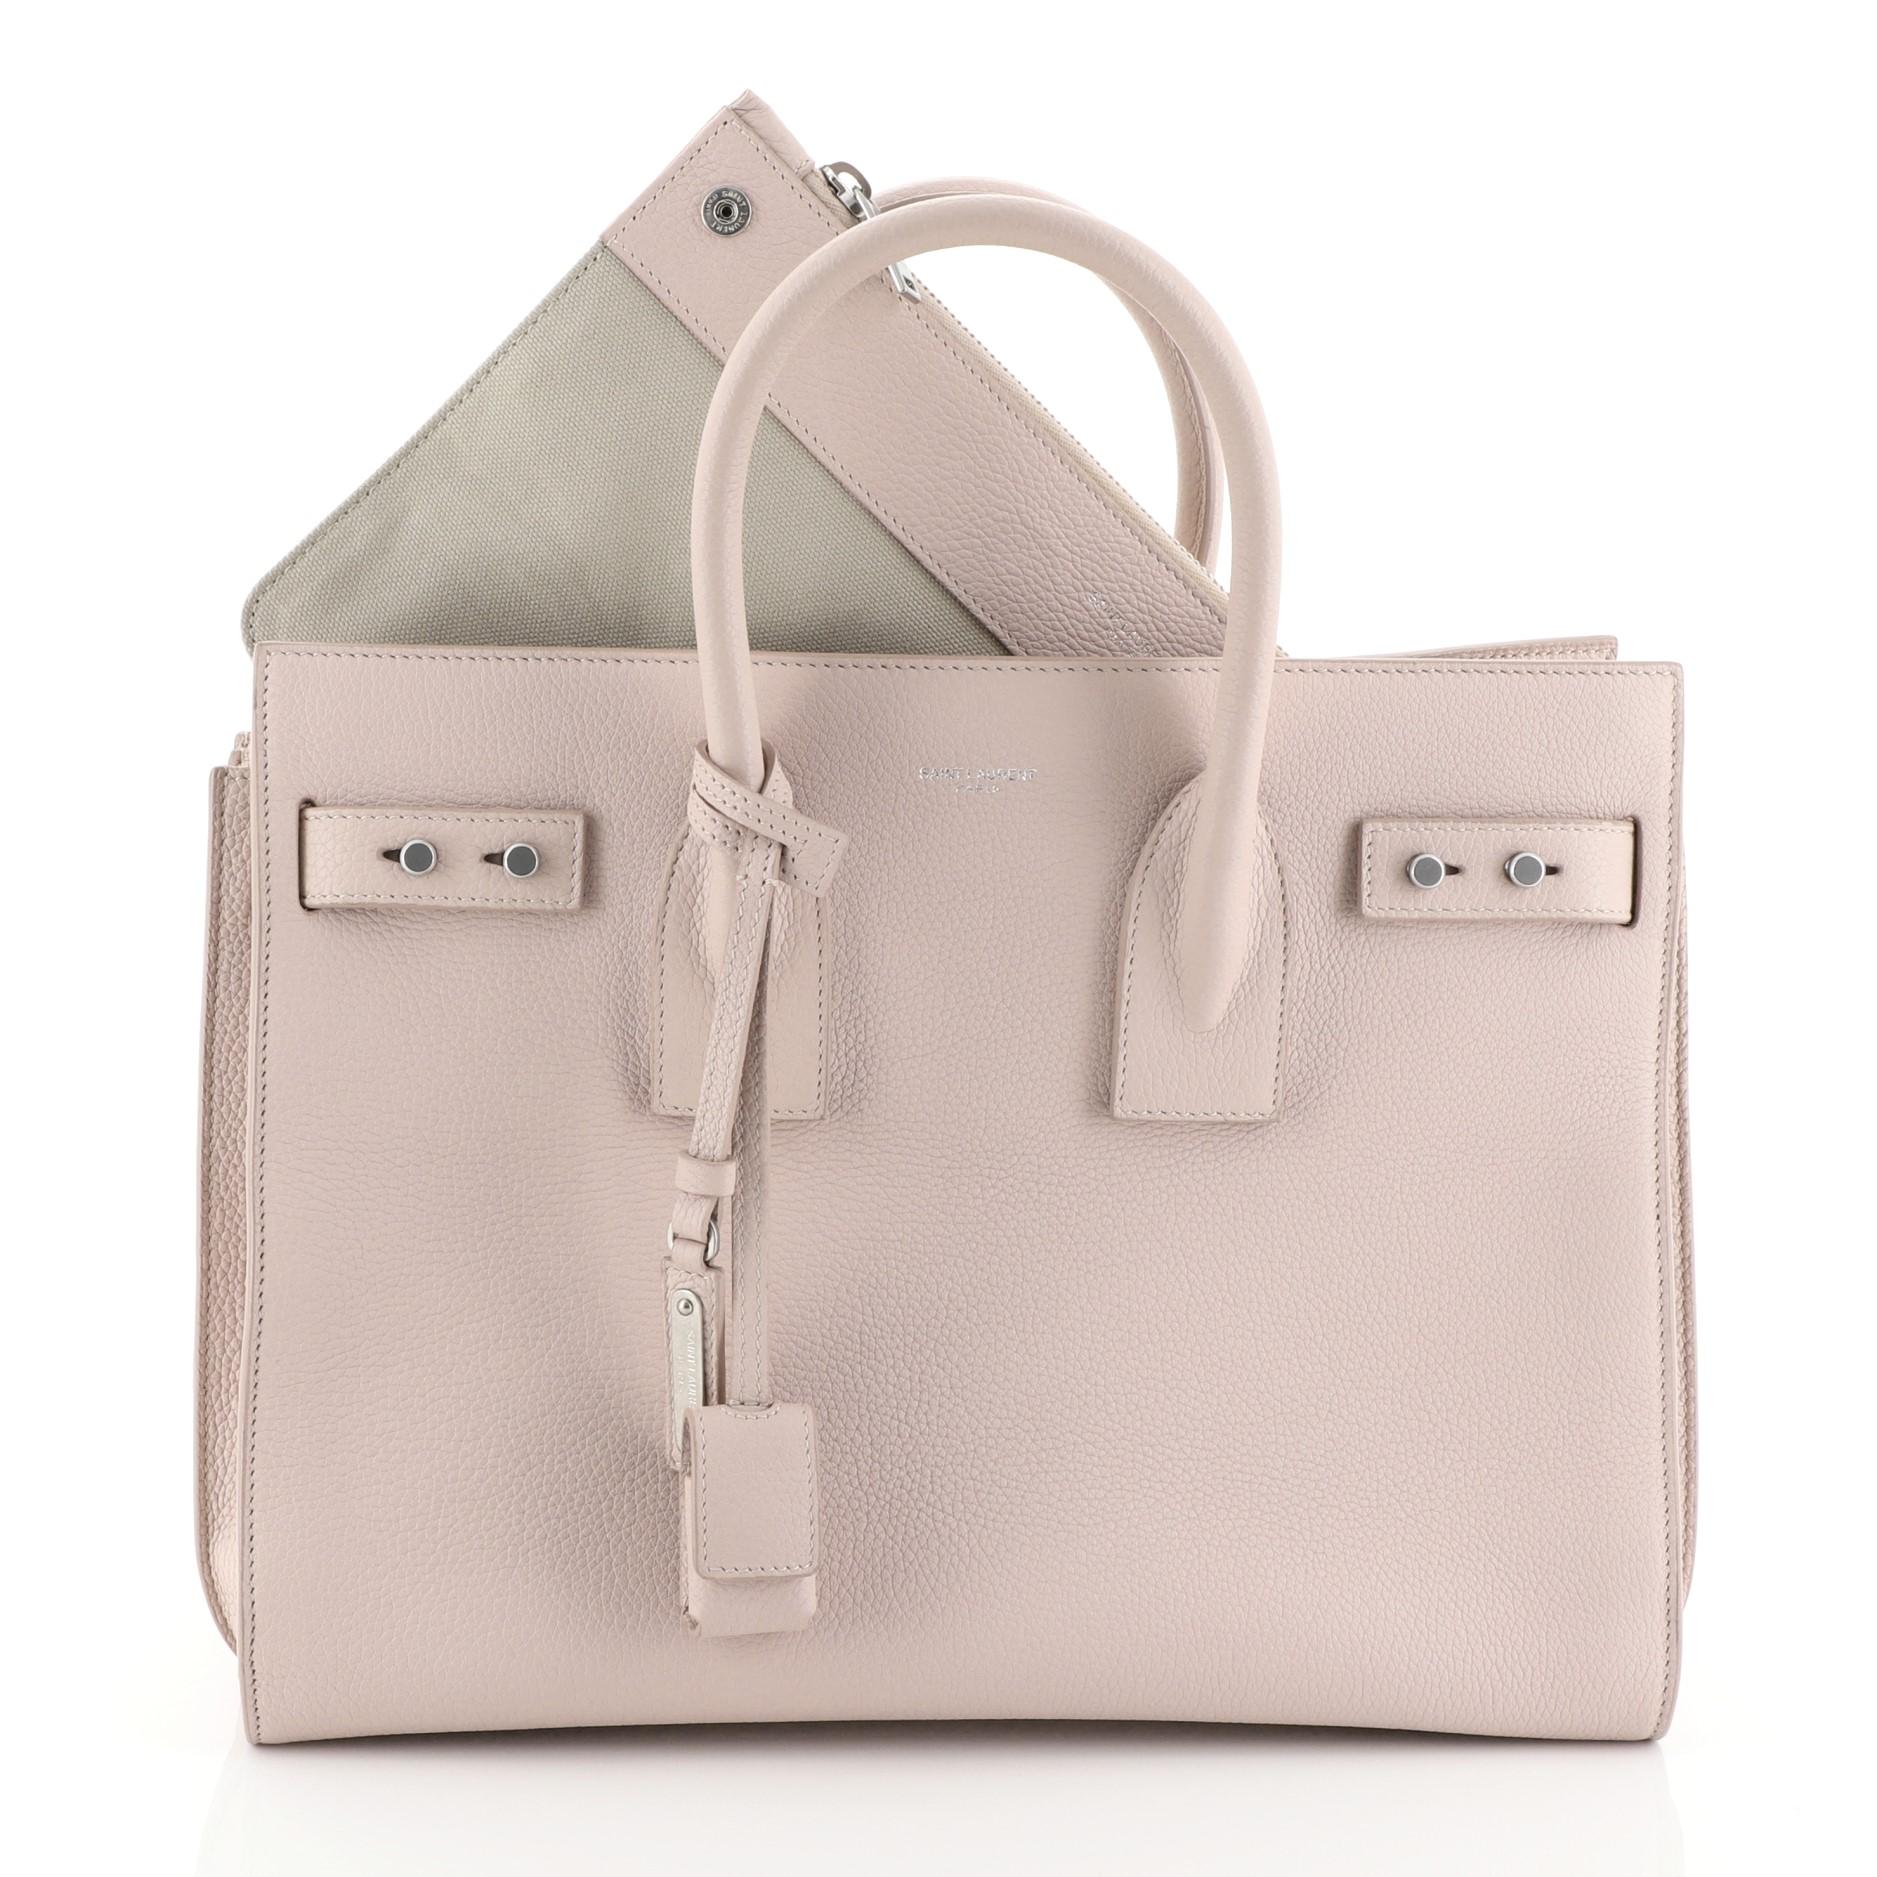 This Saint Laurent Sac de Jour Souple Bag Leather Small, crafted from pink leather, features dual rolled leather handles, accordion sides, leather tabs threaded through side gusset, and silver-tone hardware. It opens to a pink suede interior with